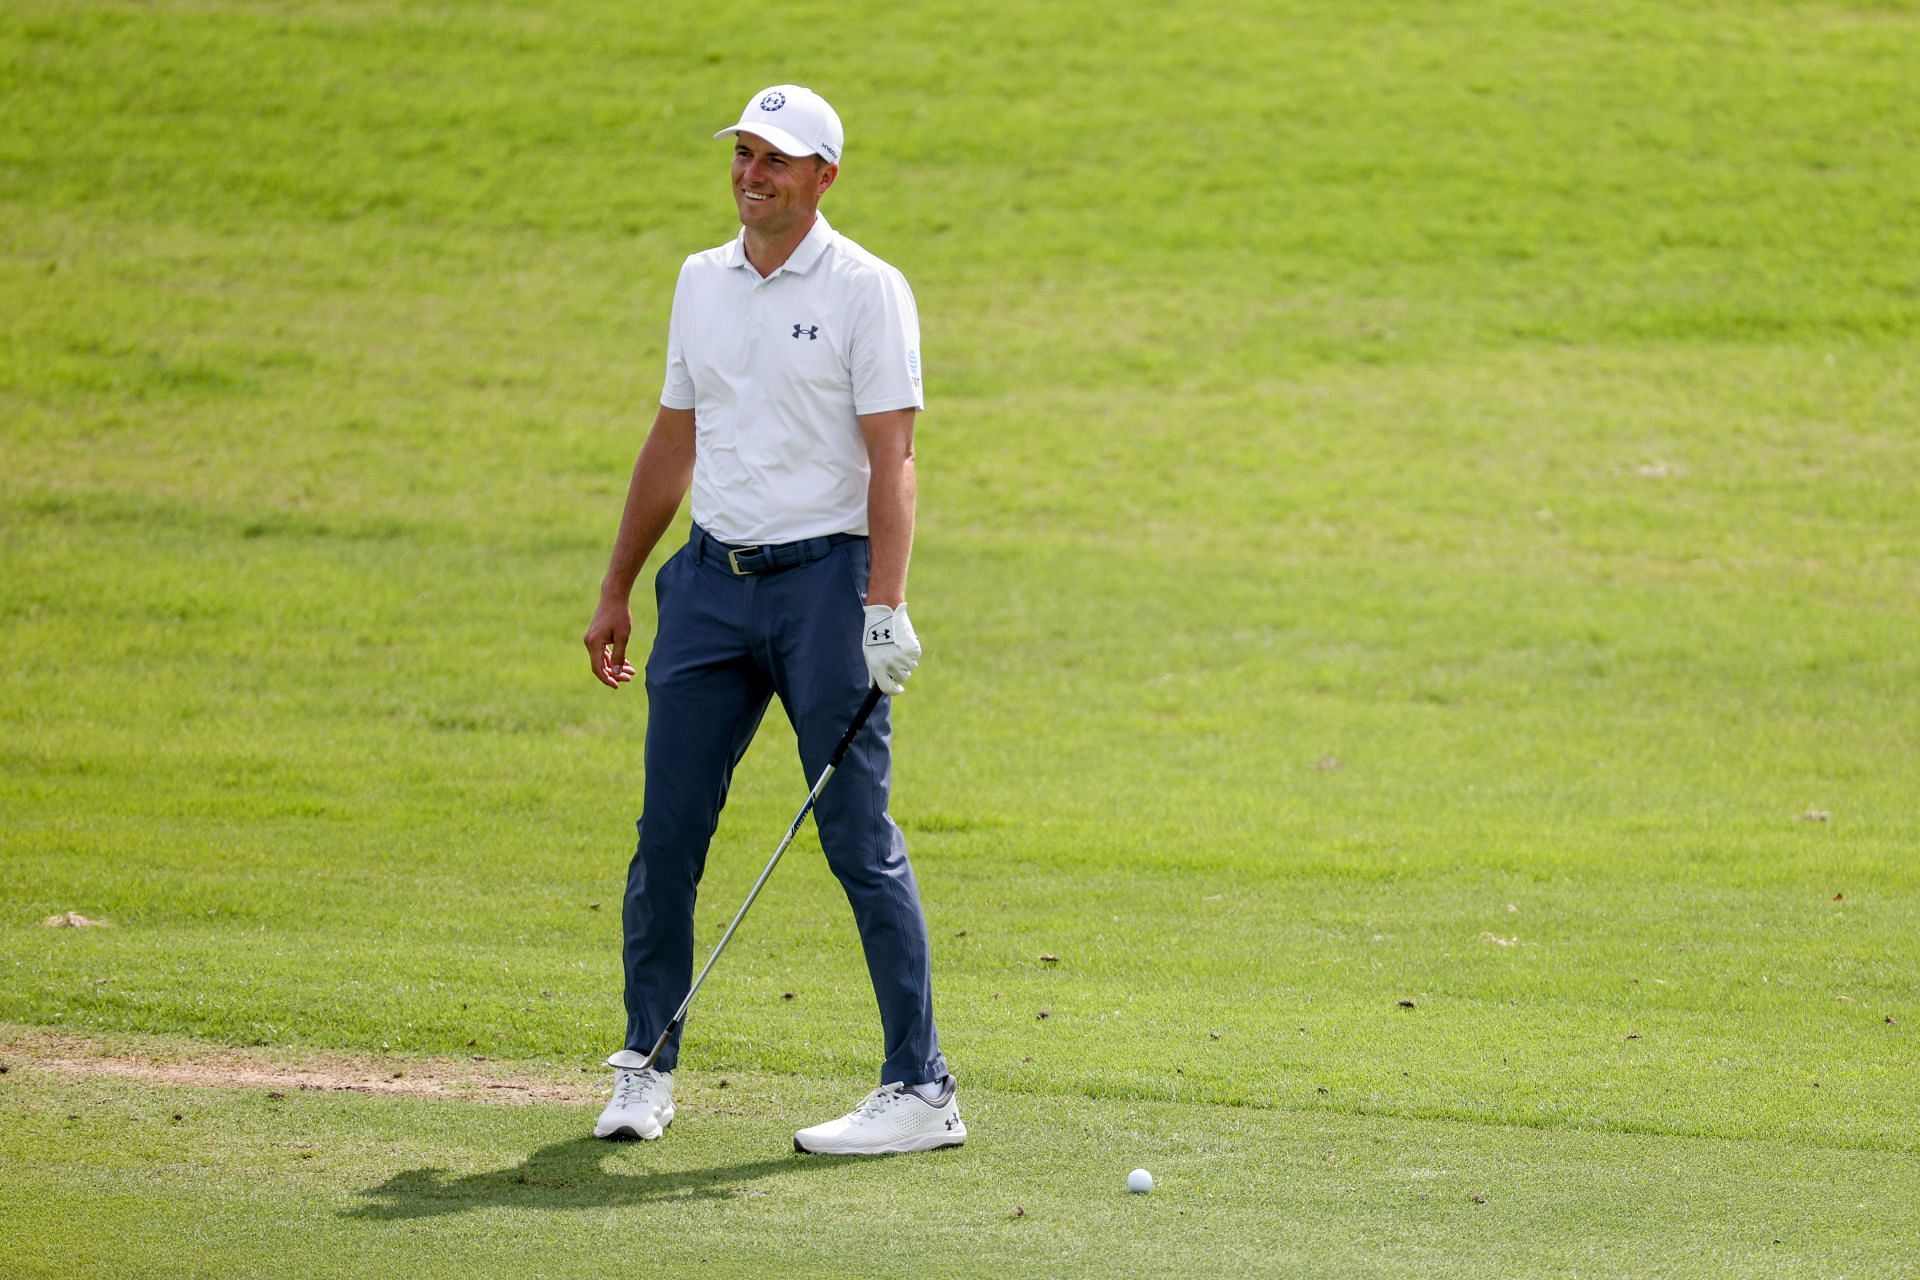 Jordan Spieth reacts to a bug near his ball before hitting an approach shot on the 10th hole during the second round of the CJ Cup Byron Nelson